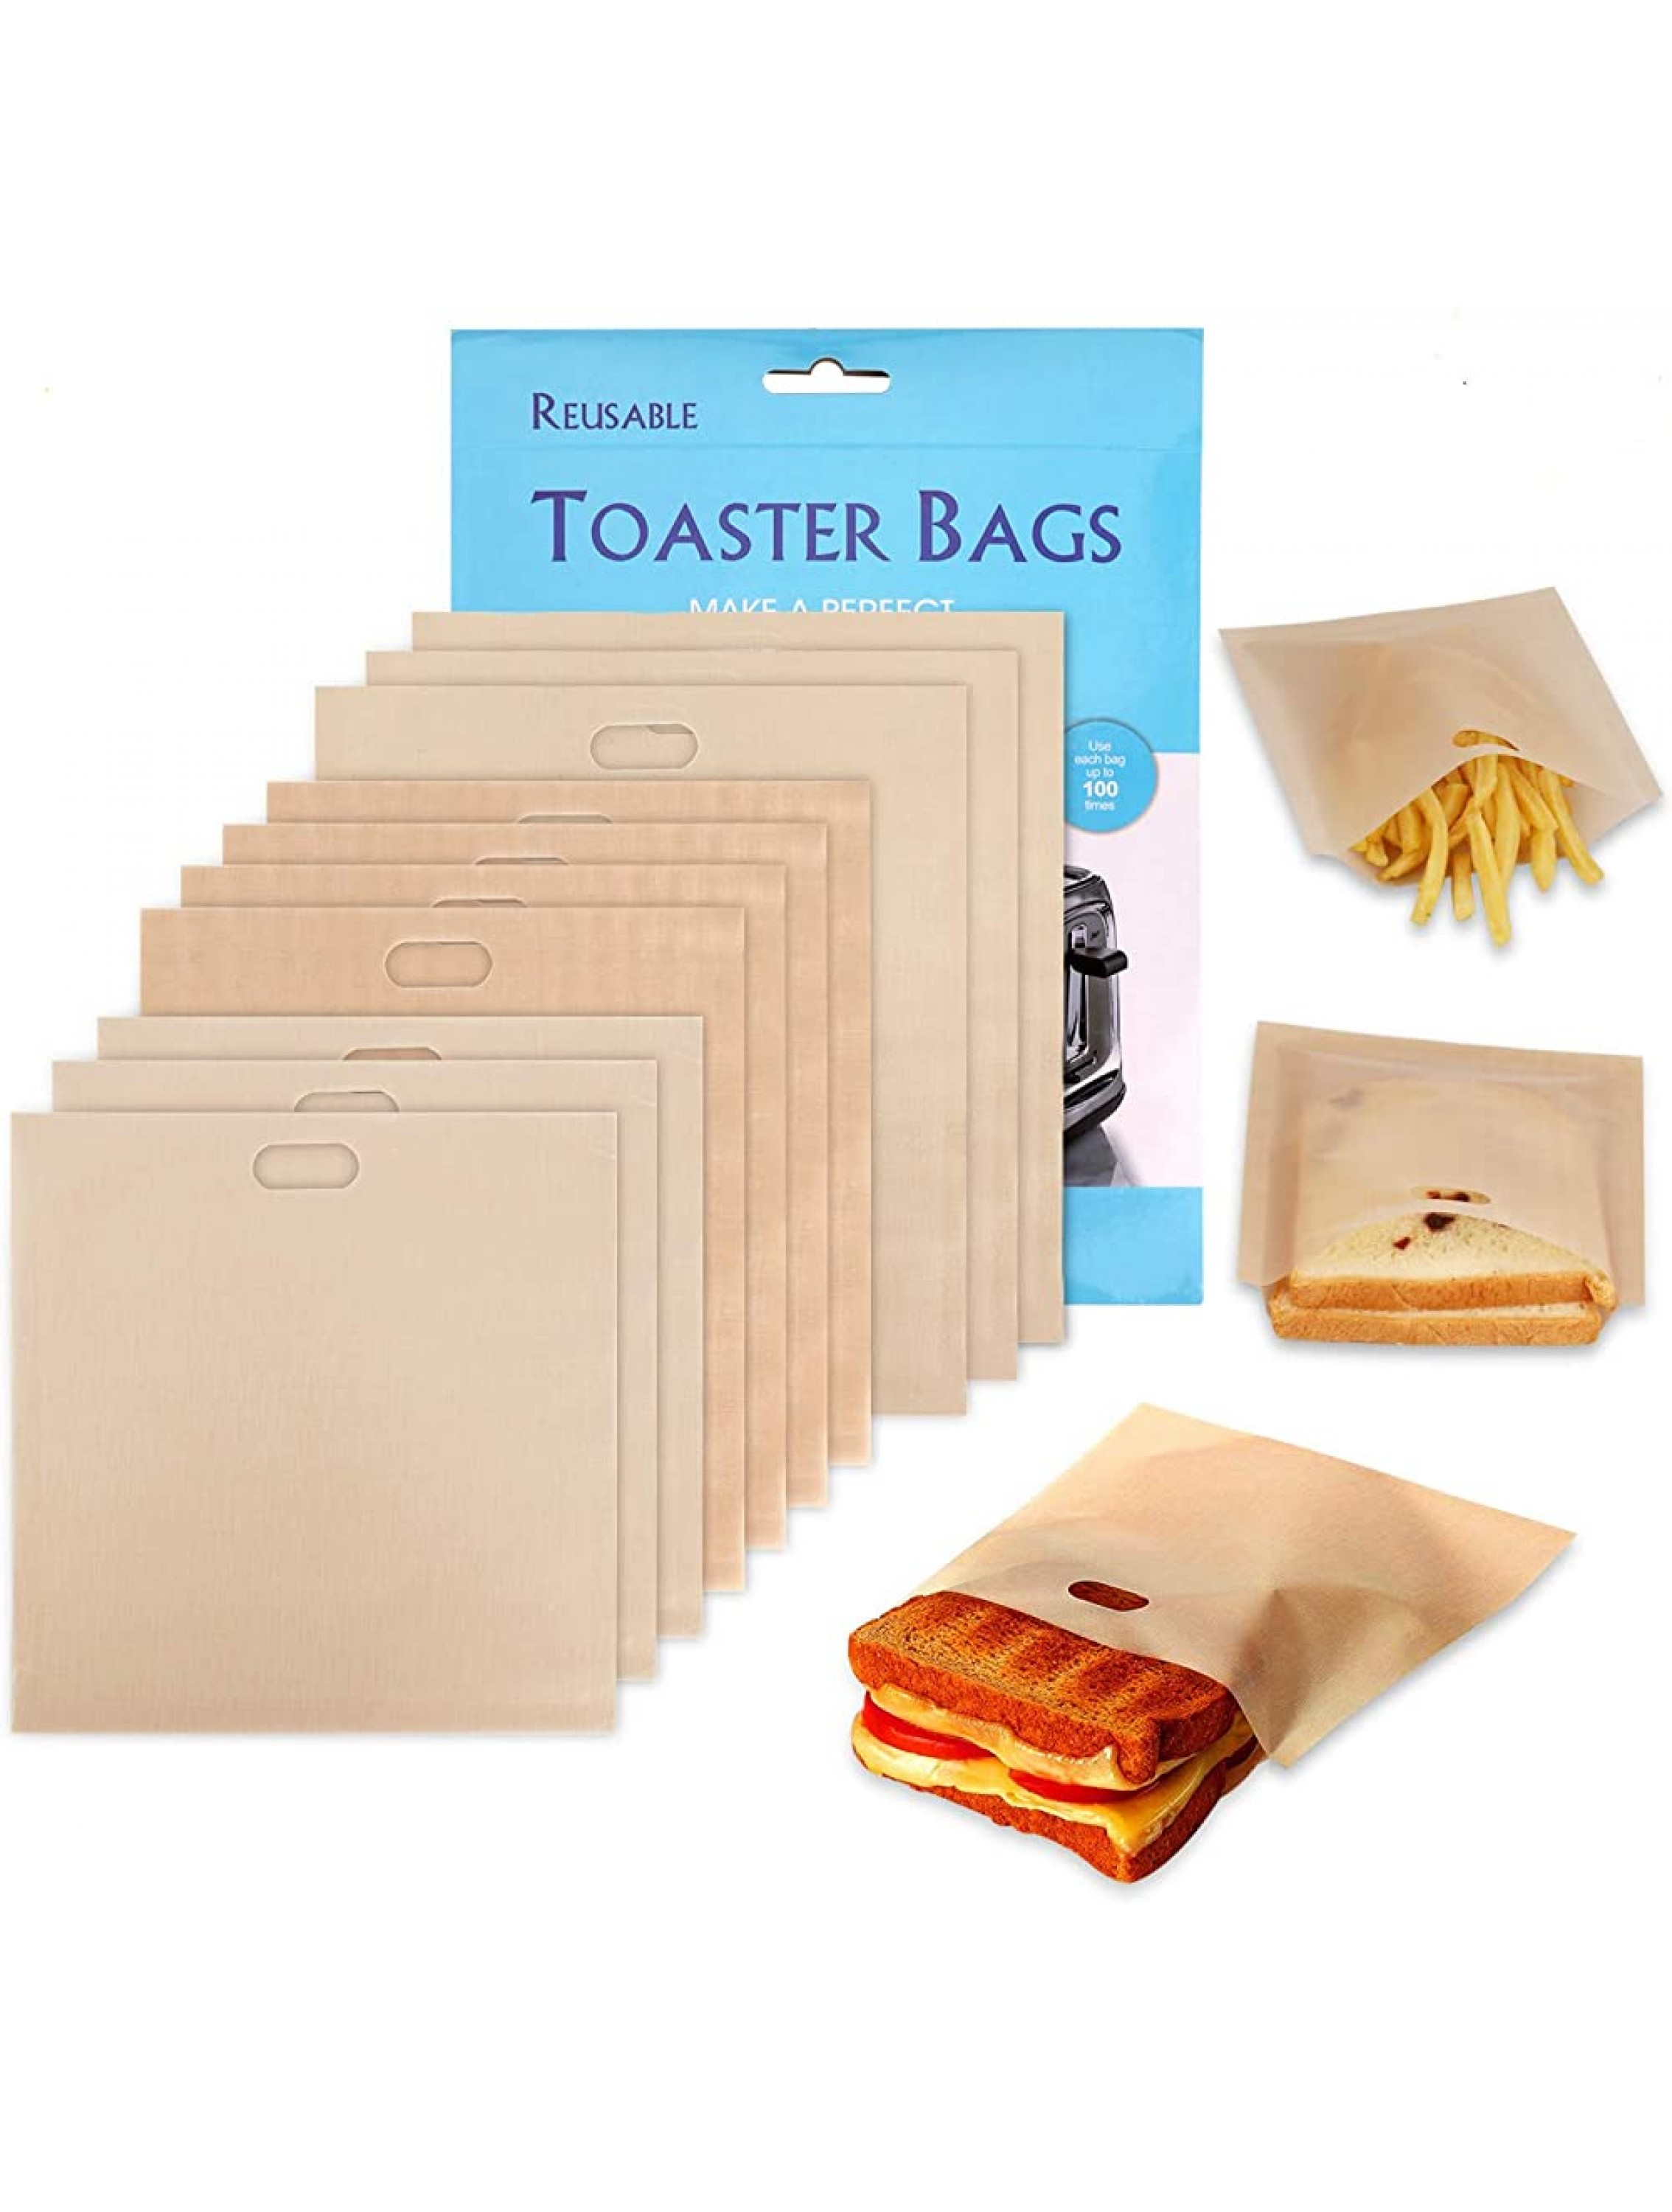 10 Pack Non-Stick Toaster Bags Reusable grilled cheese bags Toaster Bags for Sandwiches Chicken Nuggets Panini and Garlic Toasts - BK292CRF0